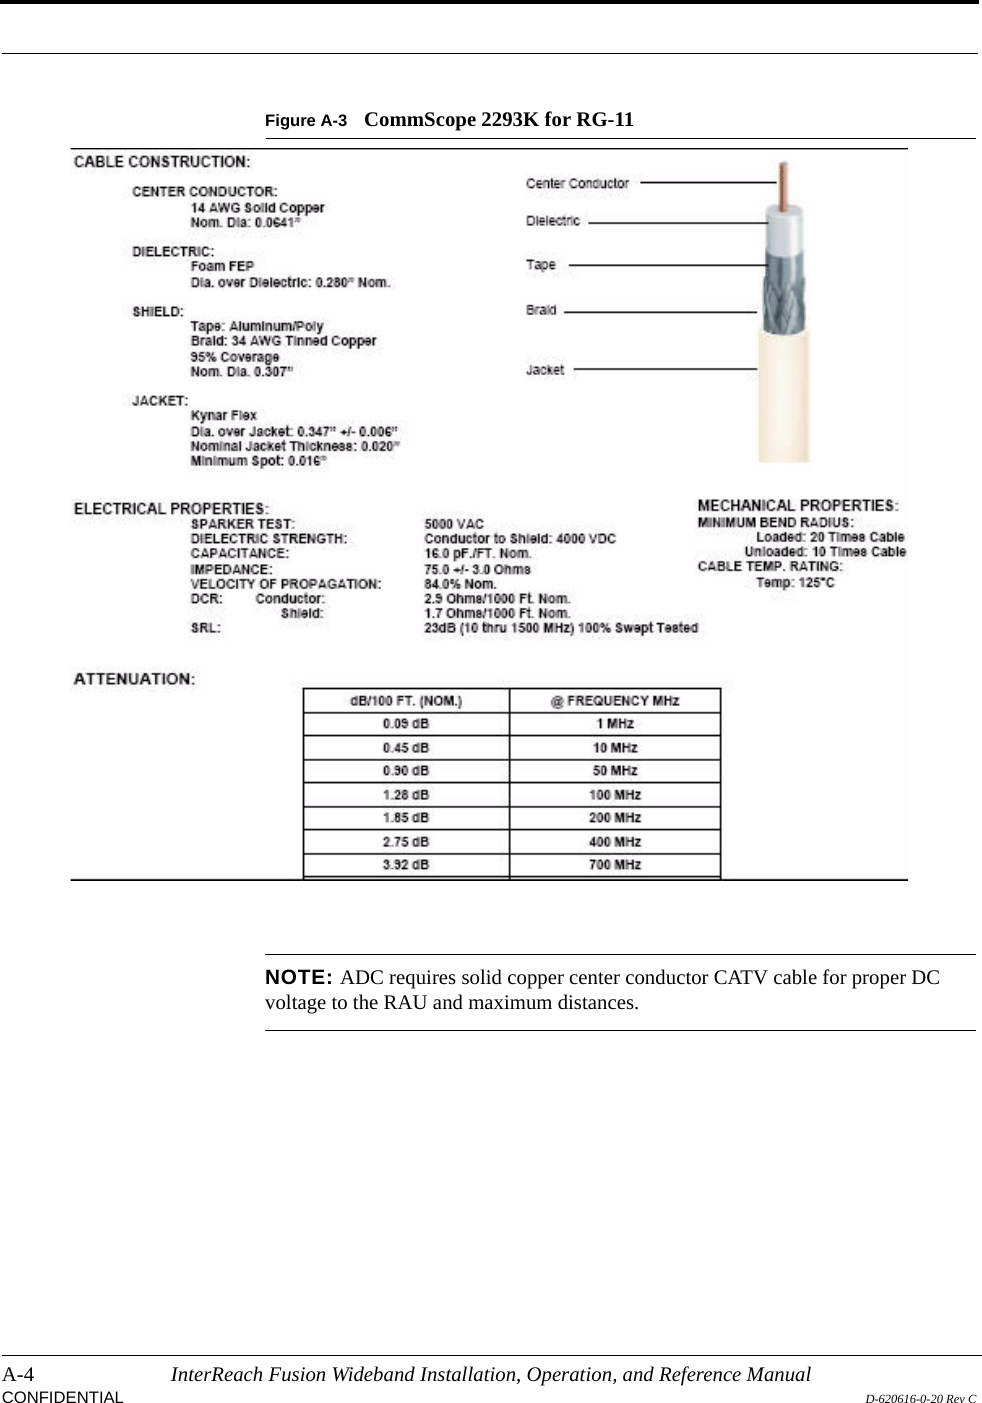 A-4 InterReach Fusion Wideband Installation, Operation, and Reference ManualCONFIDENTIAL D-620616-0-20 Rev CFigure A-3 CommScope 2293K for RG-11NOTE: ADC requires solid copper center conductor CATV cable for proper DC voltage to the RAU and maximum distances.